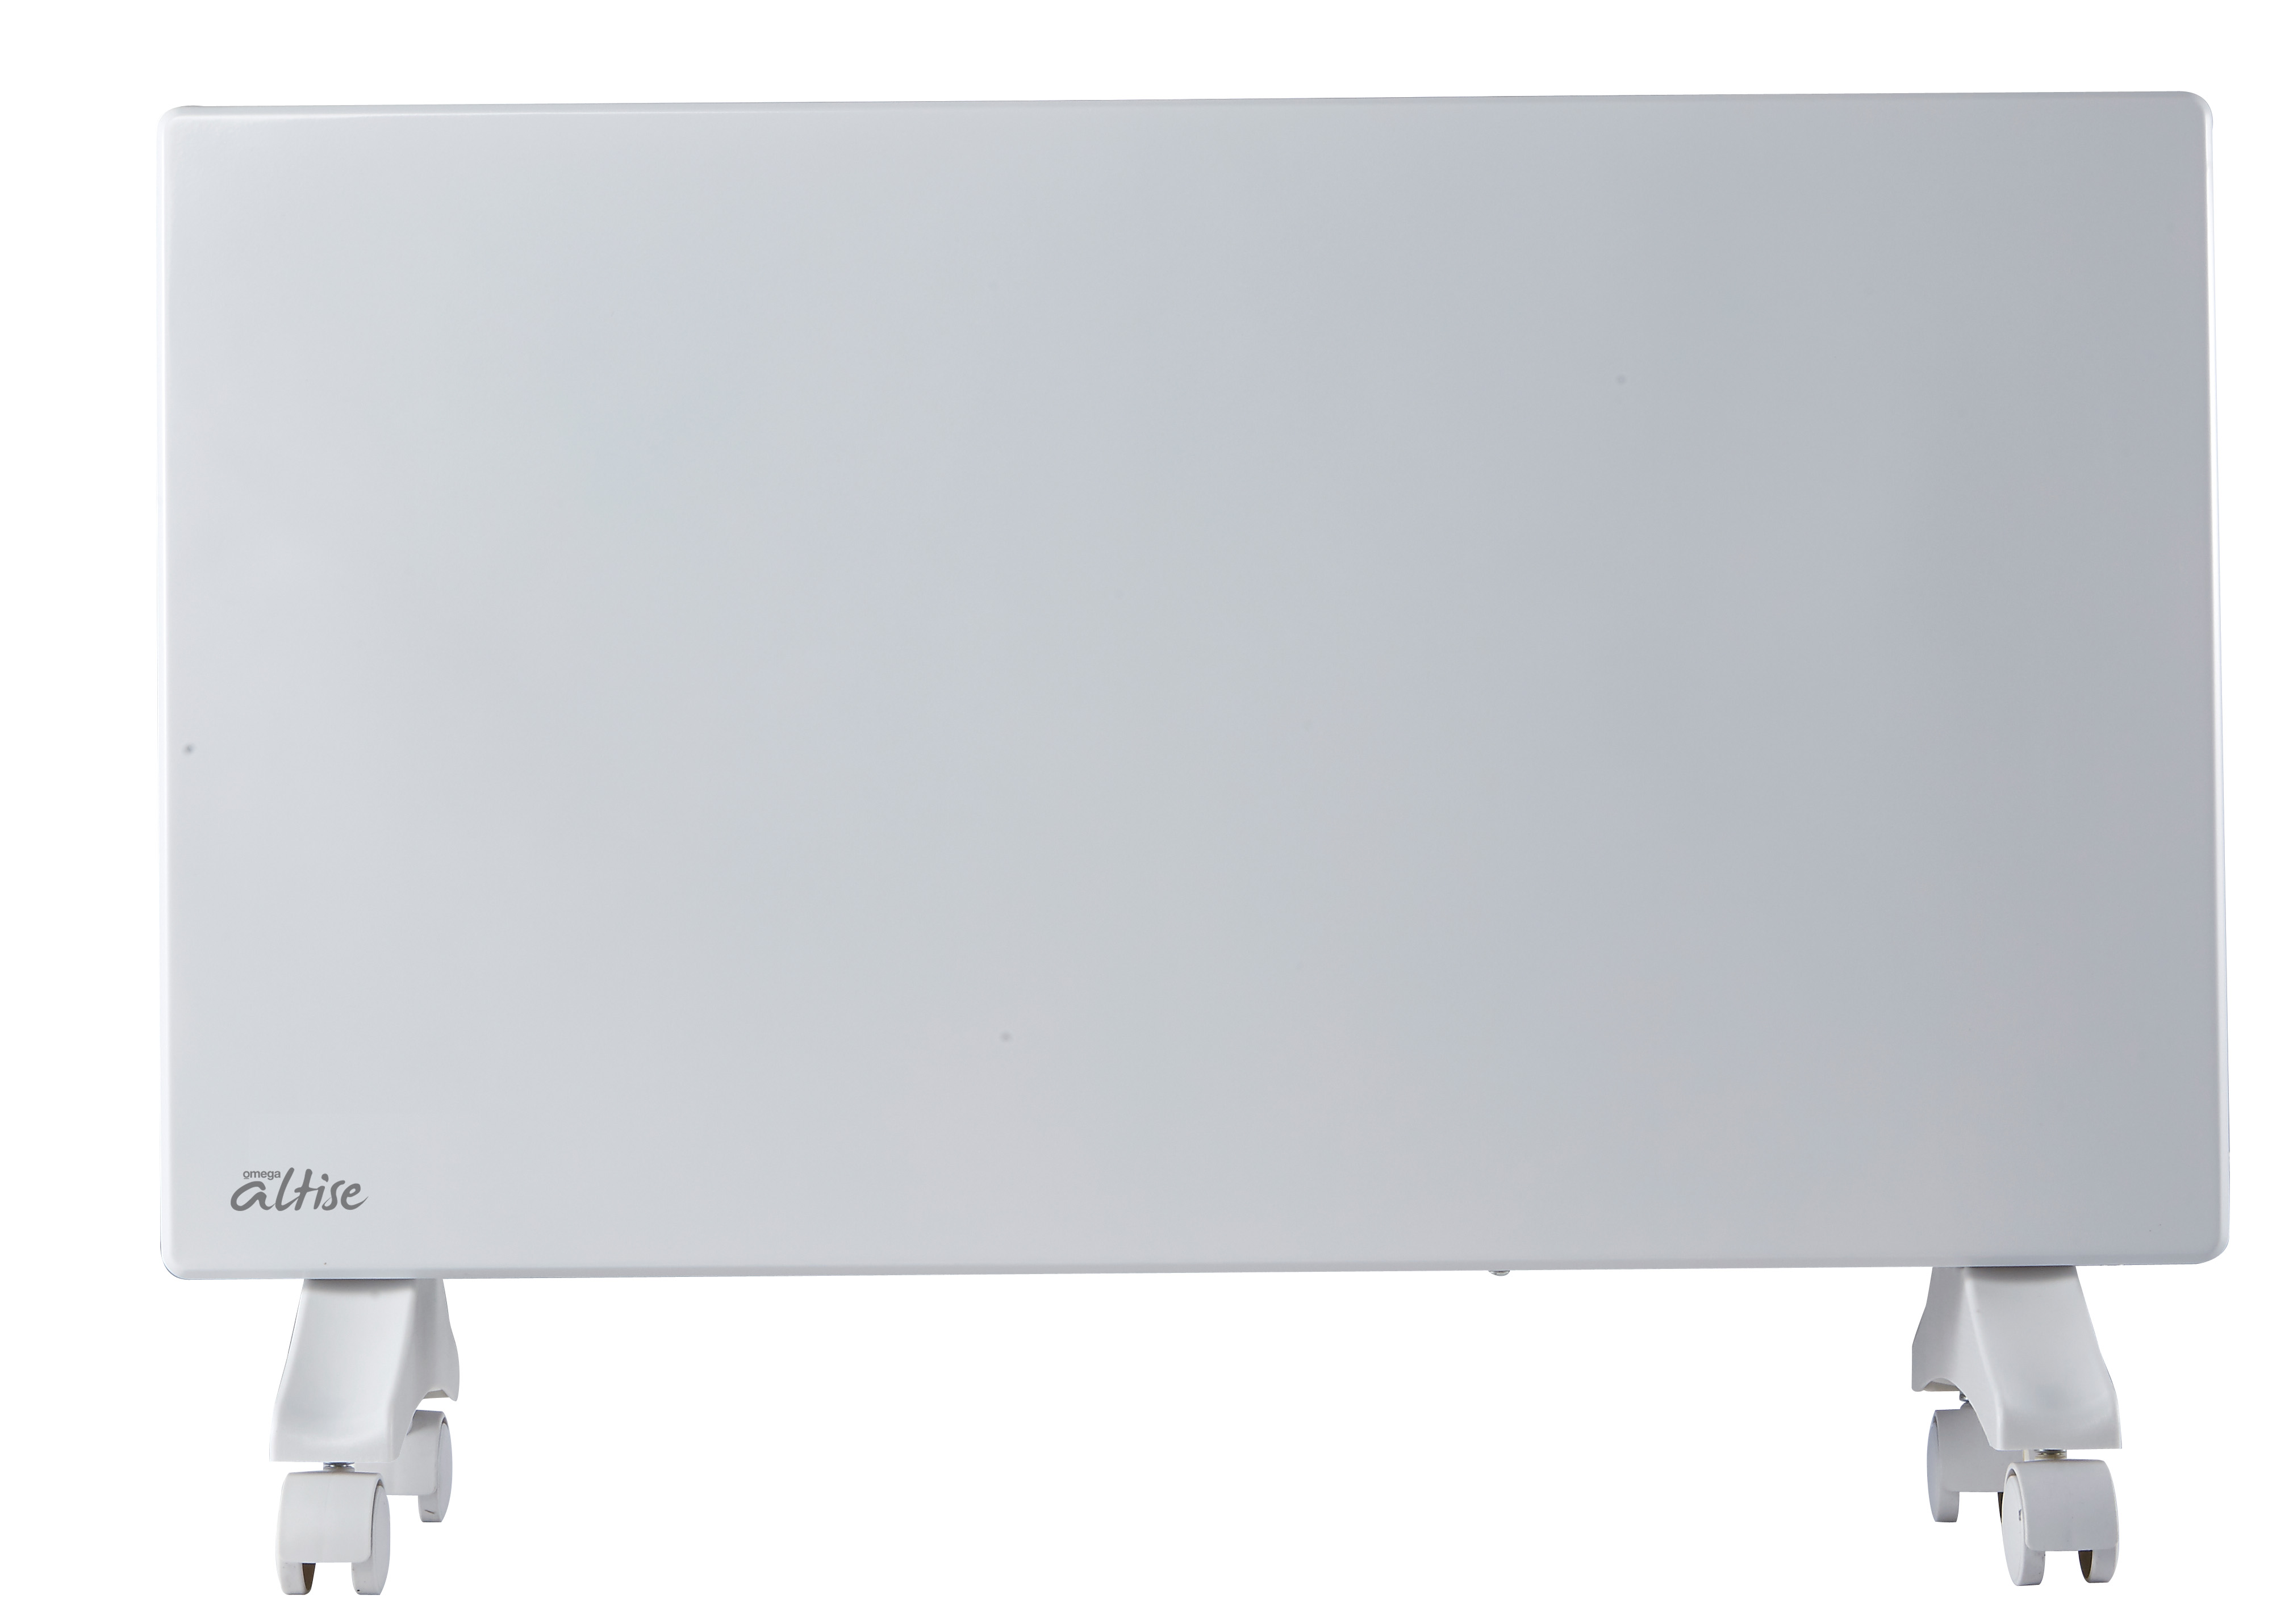 Omega Altise product Panel Convection Heater with LED Display - White 2000W  OAPE2000W